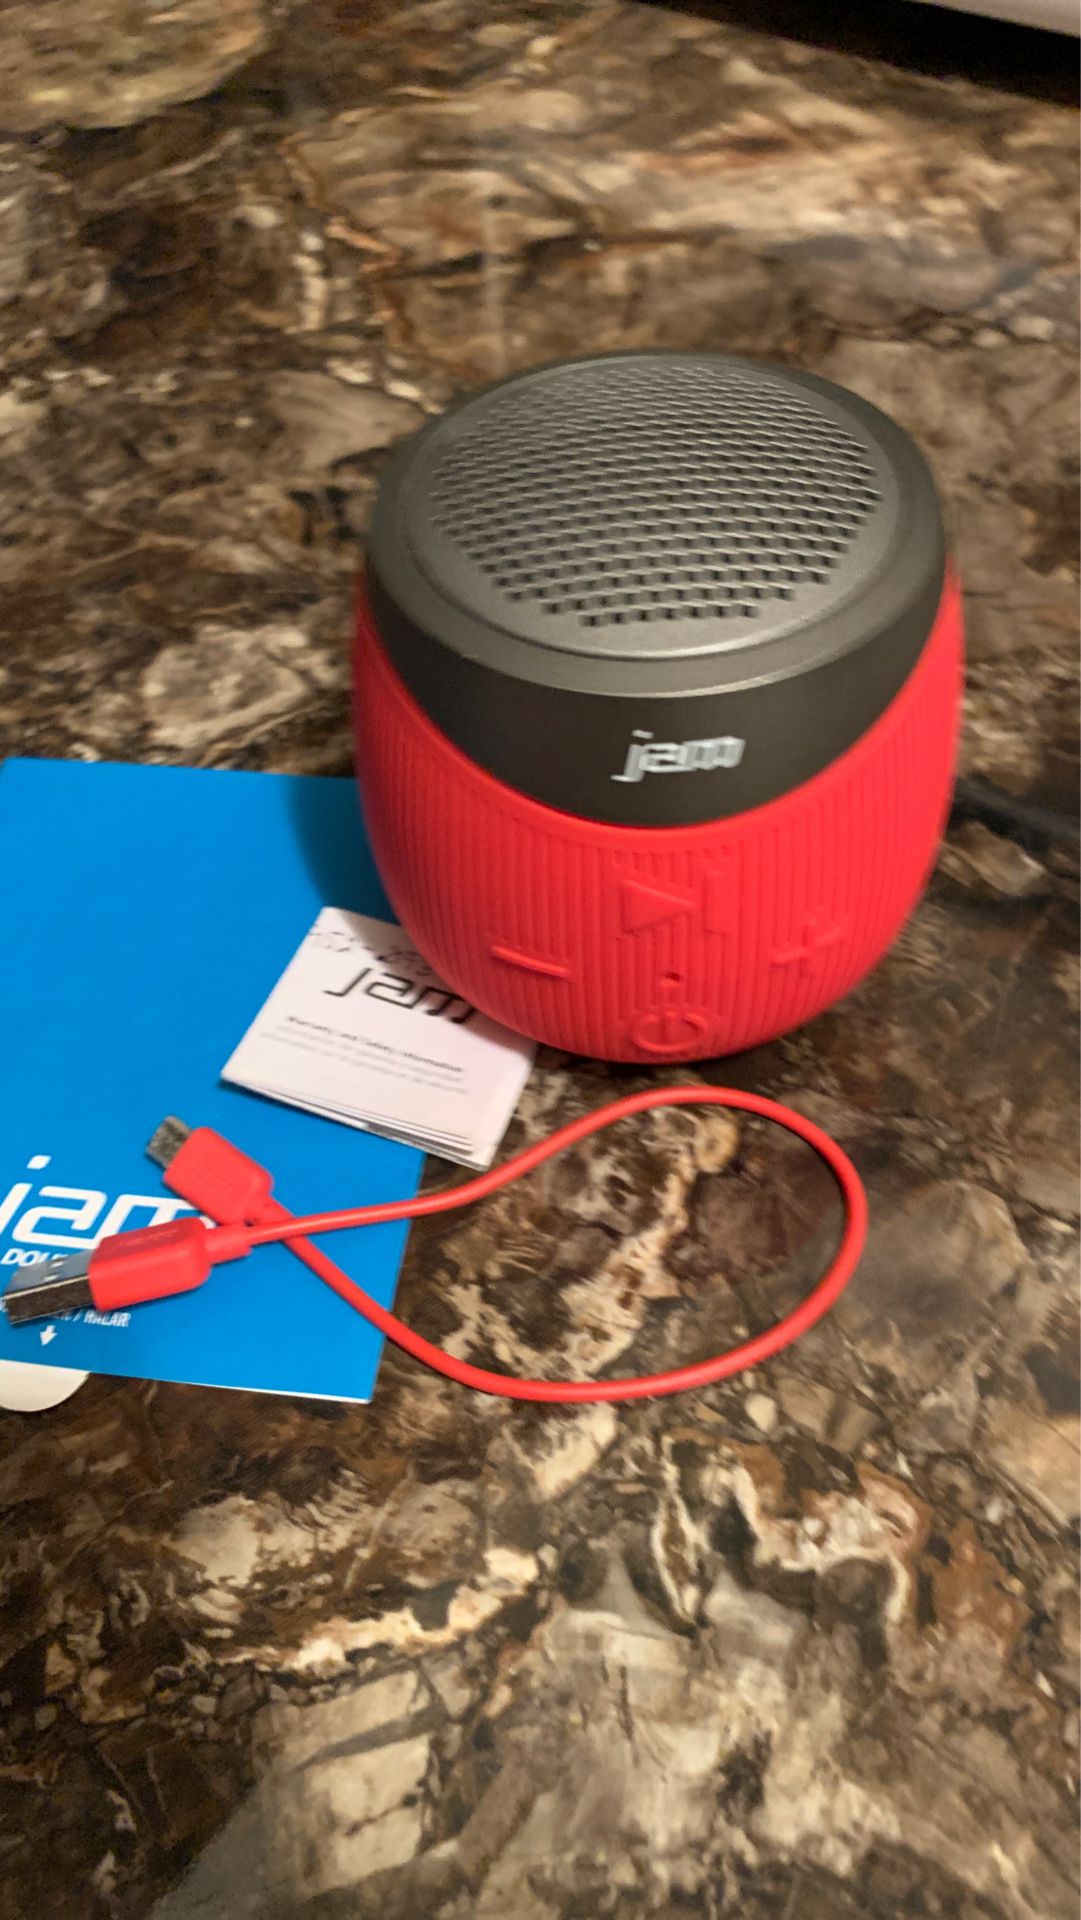 Jam Double Down Bluetooth speaker new never used